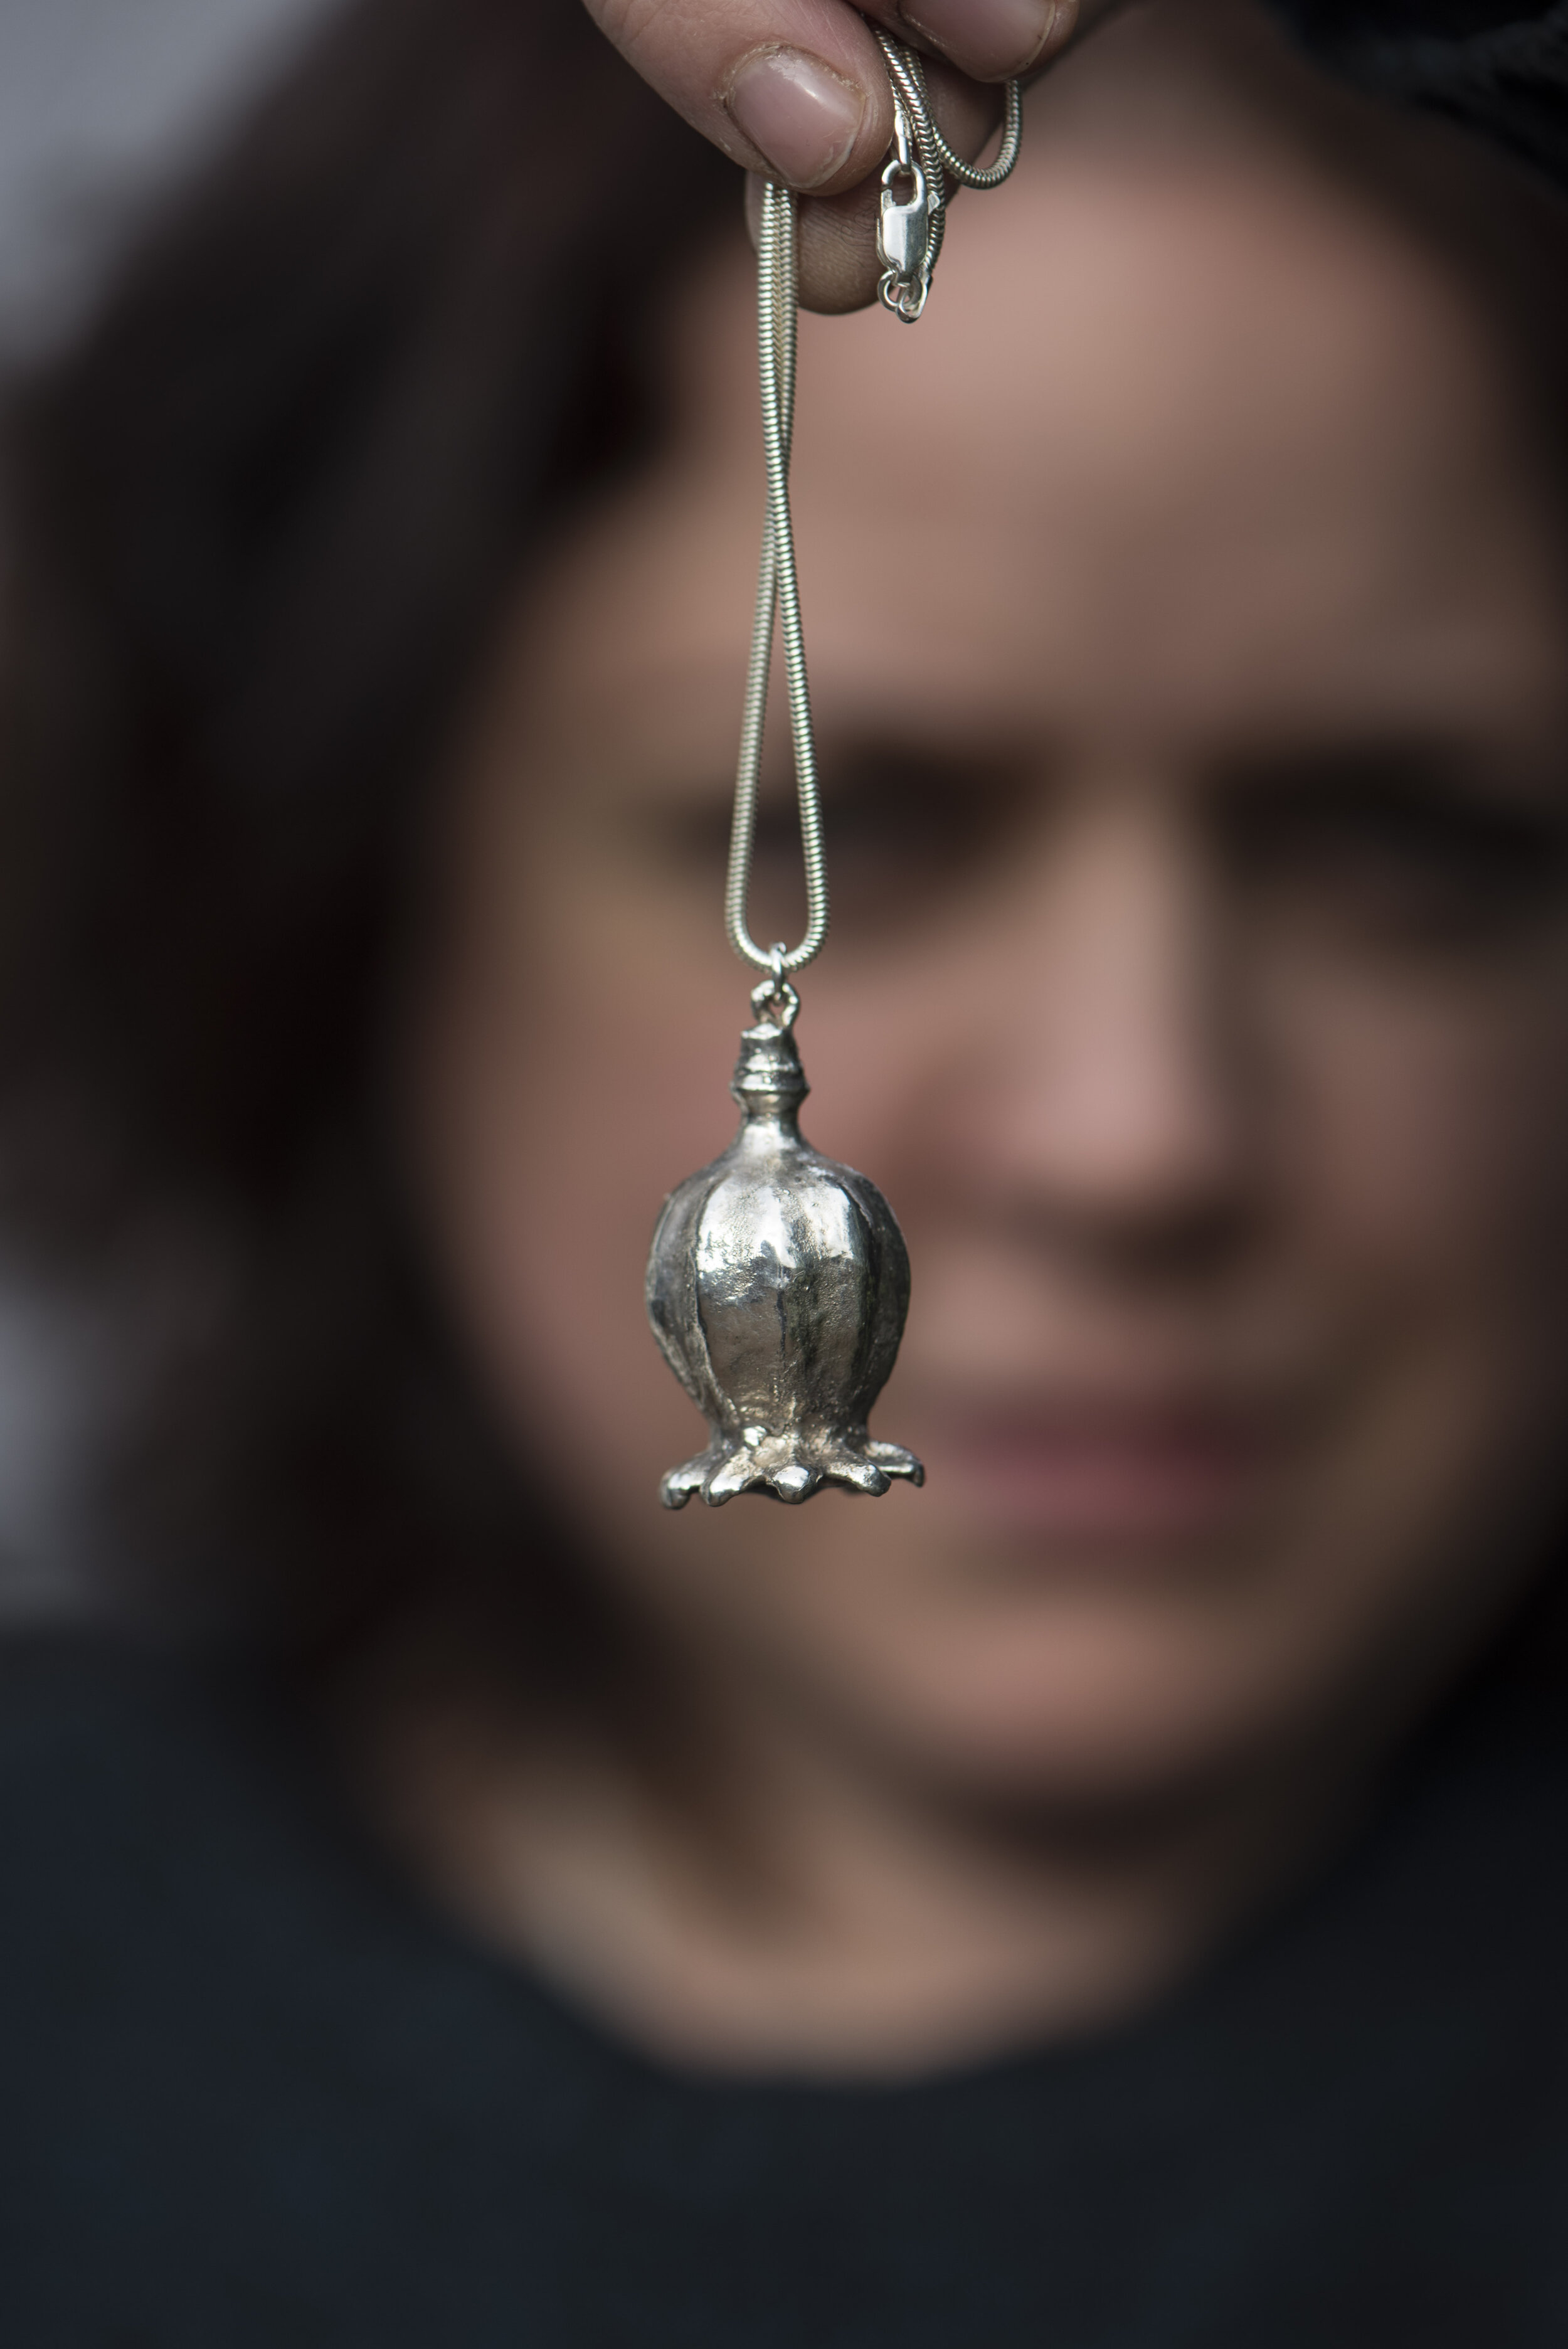 Jules Asch with rosehip pendant at the Silvery.jpg